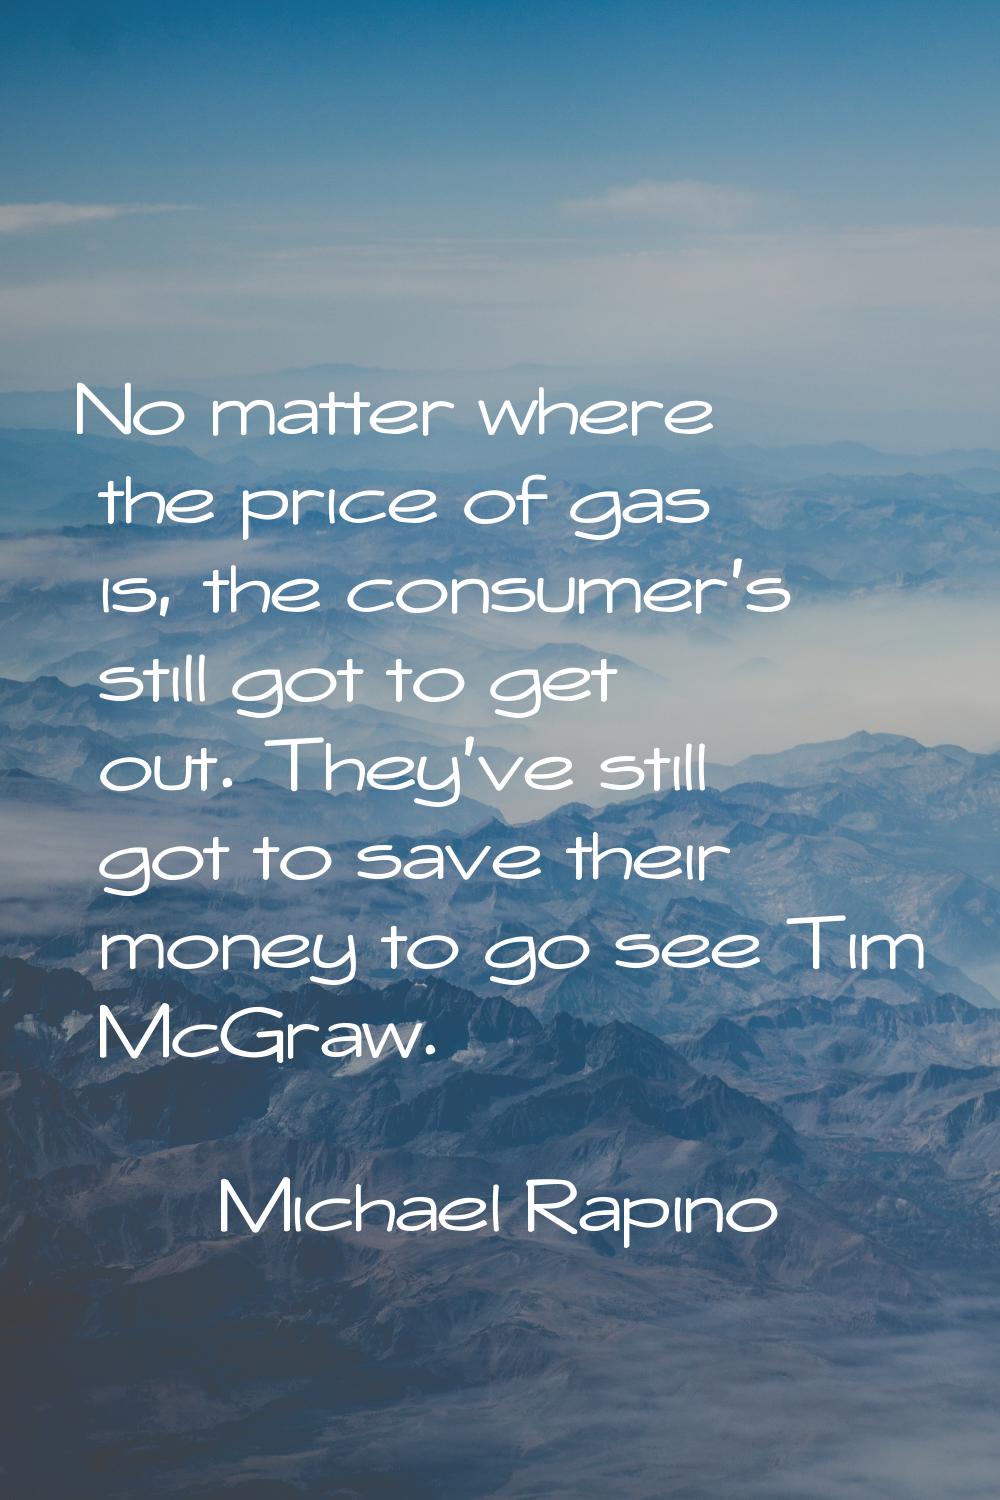 No matter where the price of gas is, the consumer's still got to get out. They've still got to save